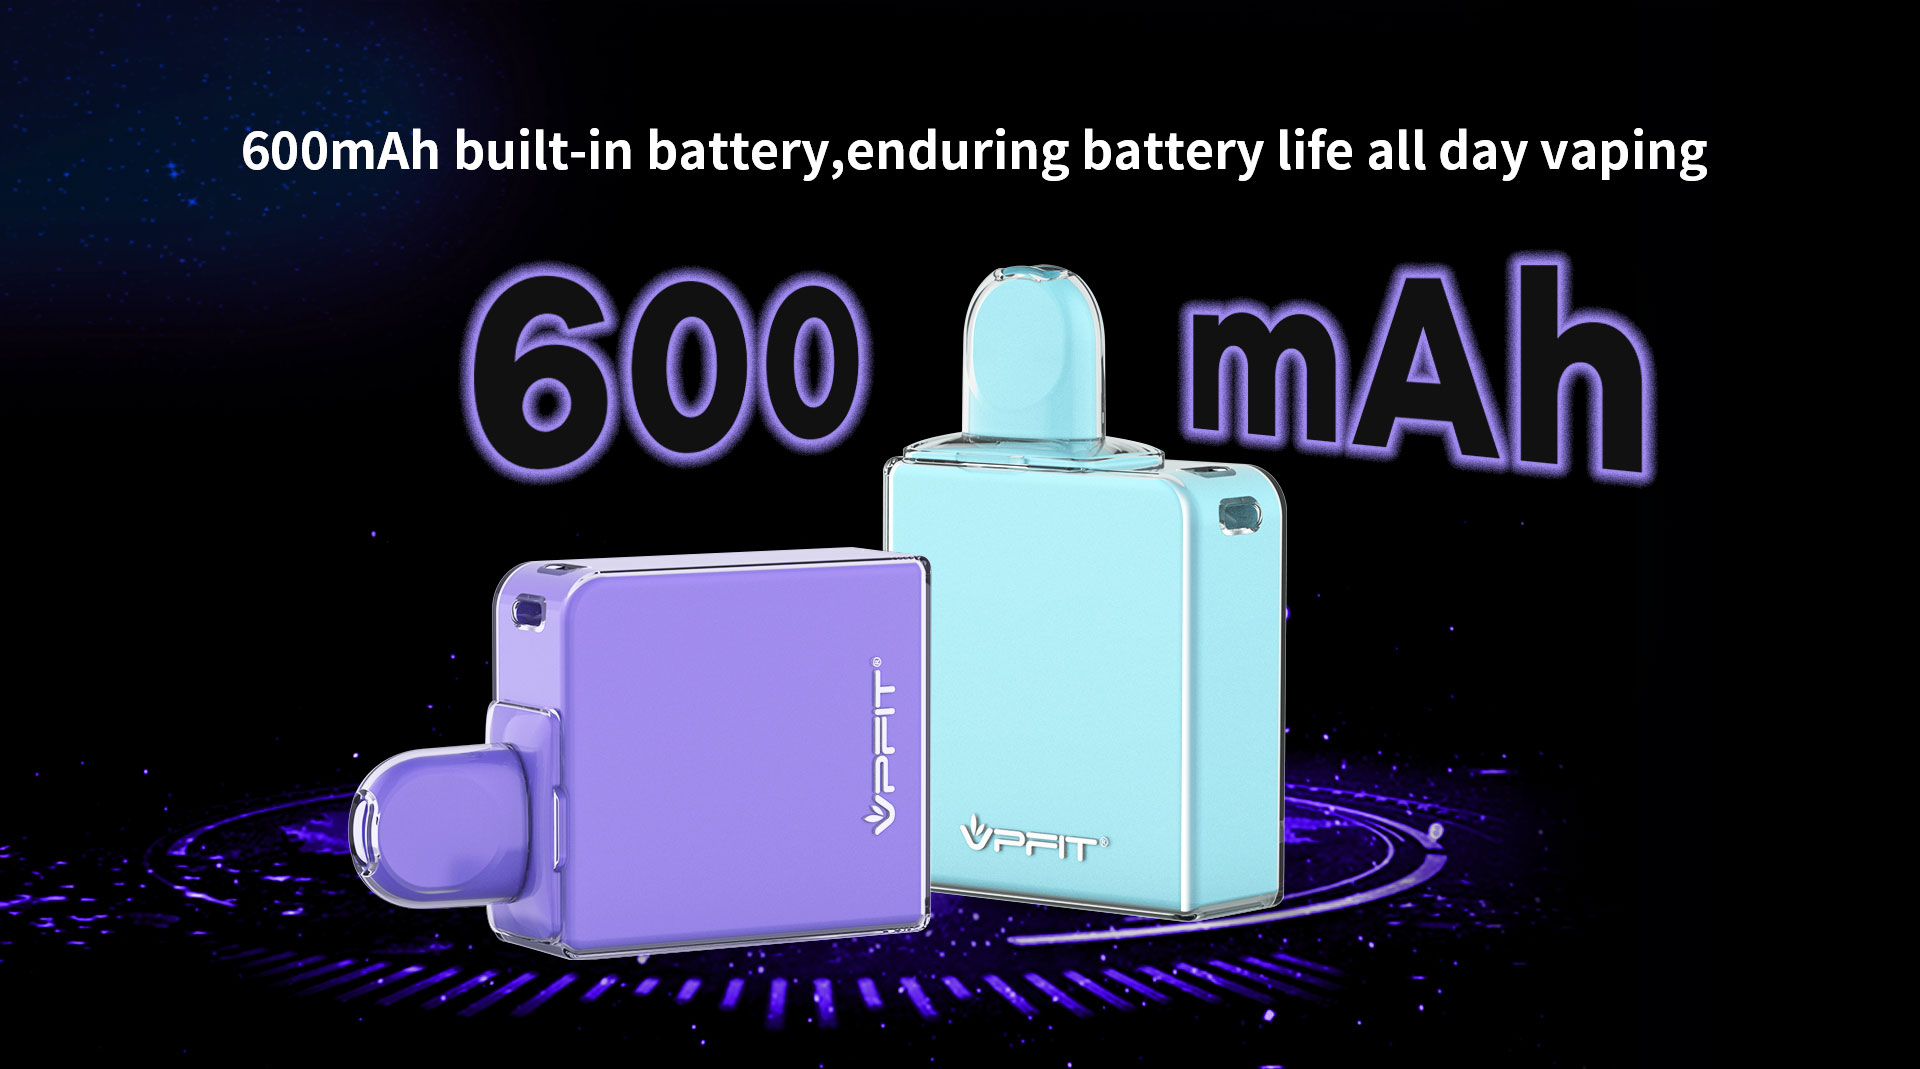 600mAh Type-C recharging battery with 5 layers protections